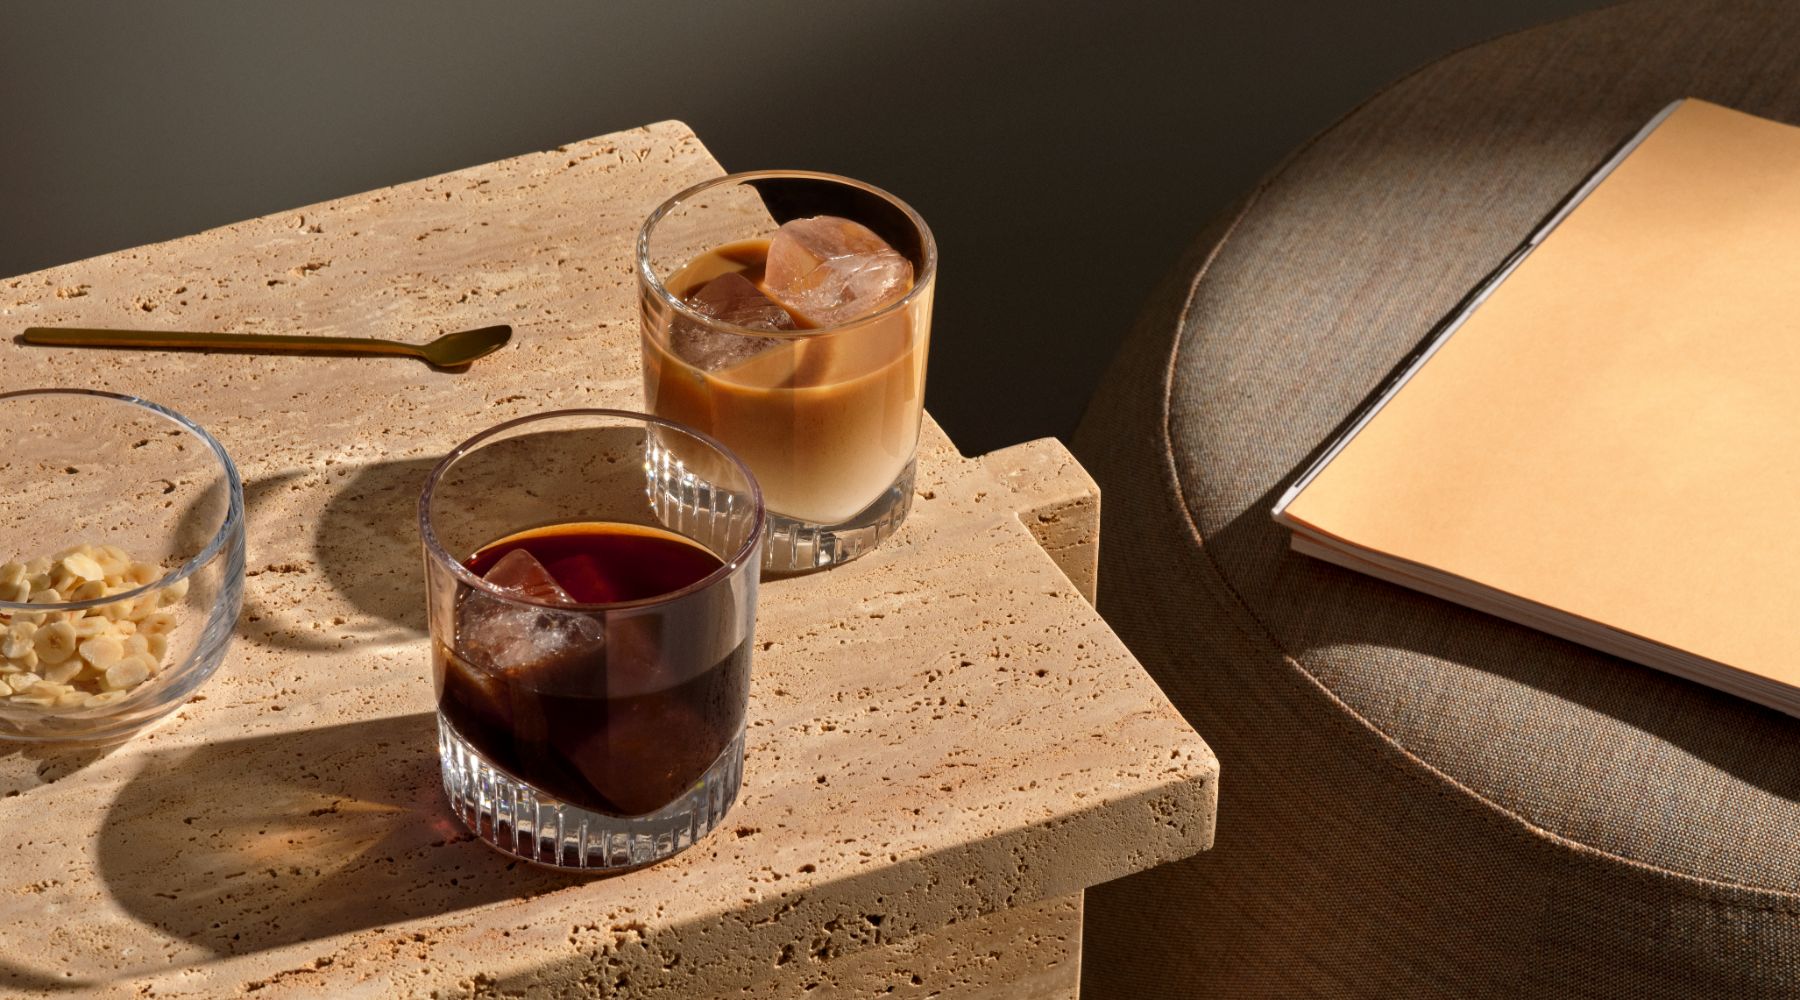 NUDE Caldera whisky glasses presented with a coffee drink and coffee with milk drink